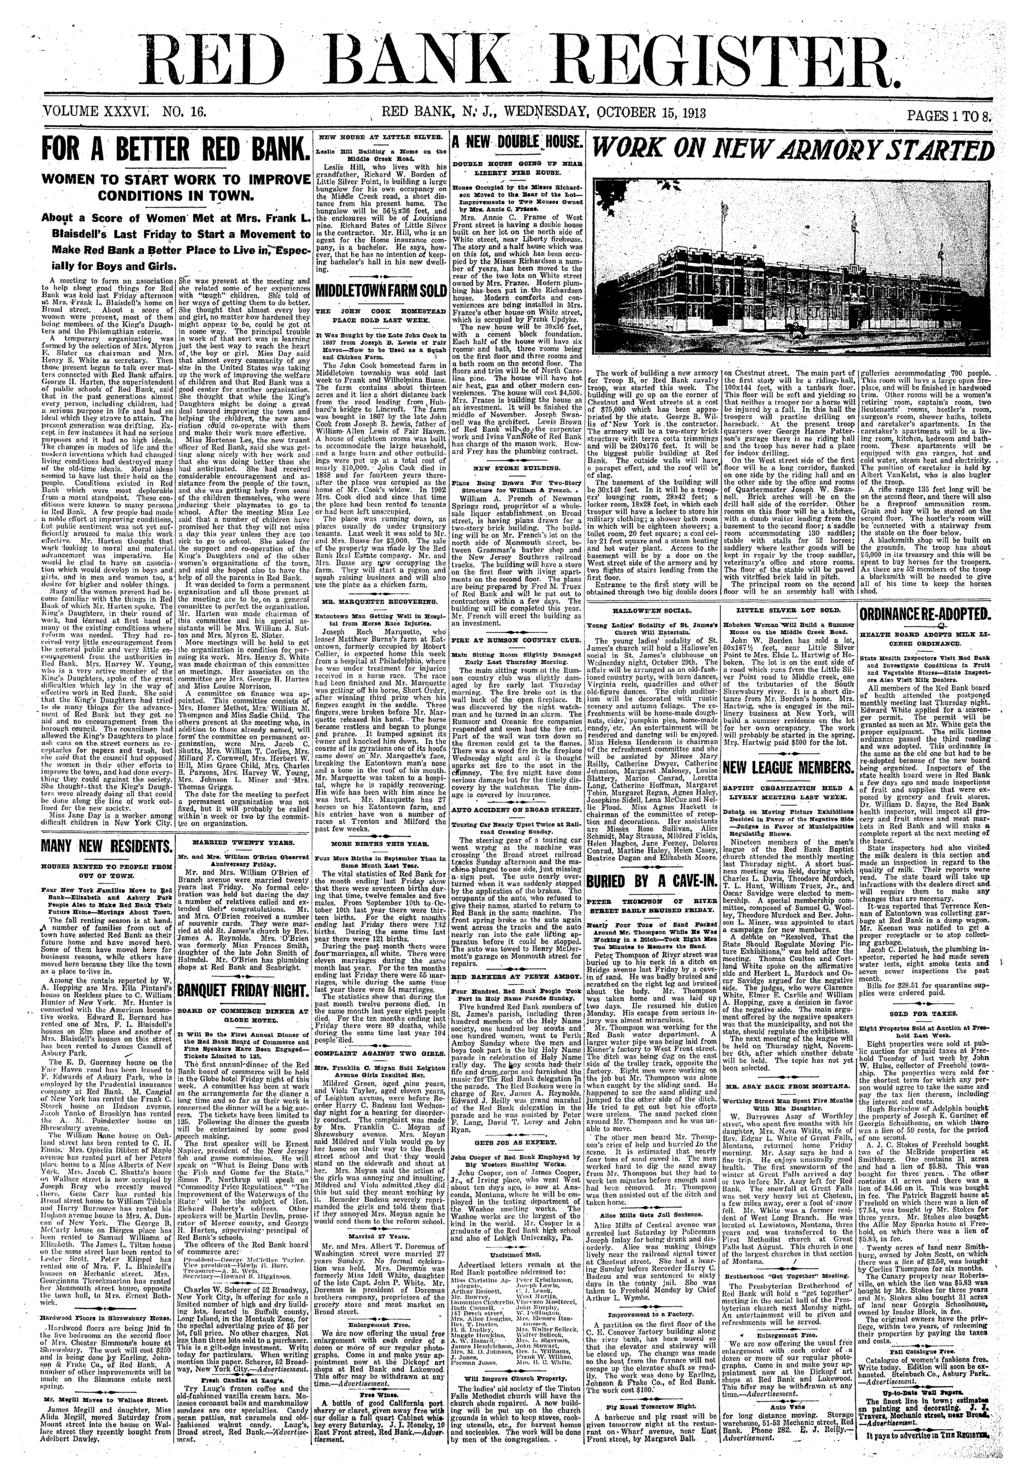 RED BANK TER VOLUME XXXV; NO. 16. RED BANK, N. J M WEDNESDA, OCTOBER 15, 1913 PAGES 1 TO 8. FOR A BETTER RED BANK. WOMEN TO START WORK TO MPROVE CONDTONS N TOWN. About a Score of Women Met at Mrs.